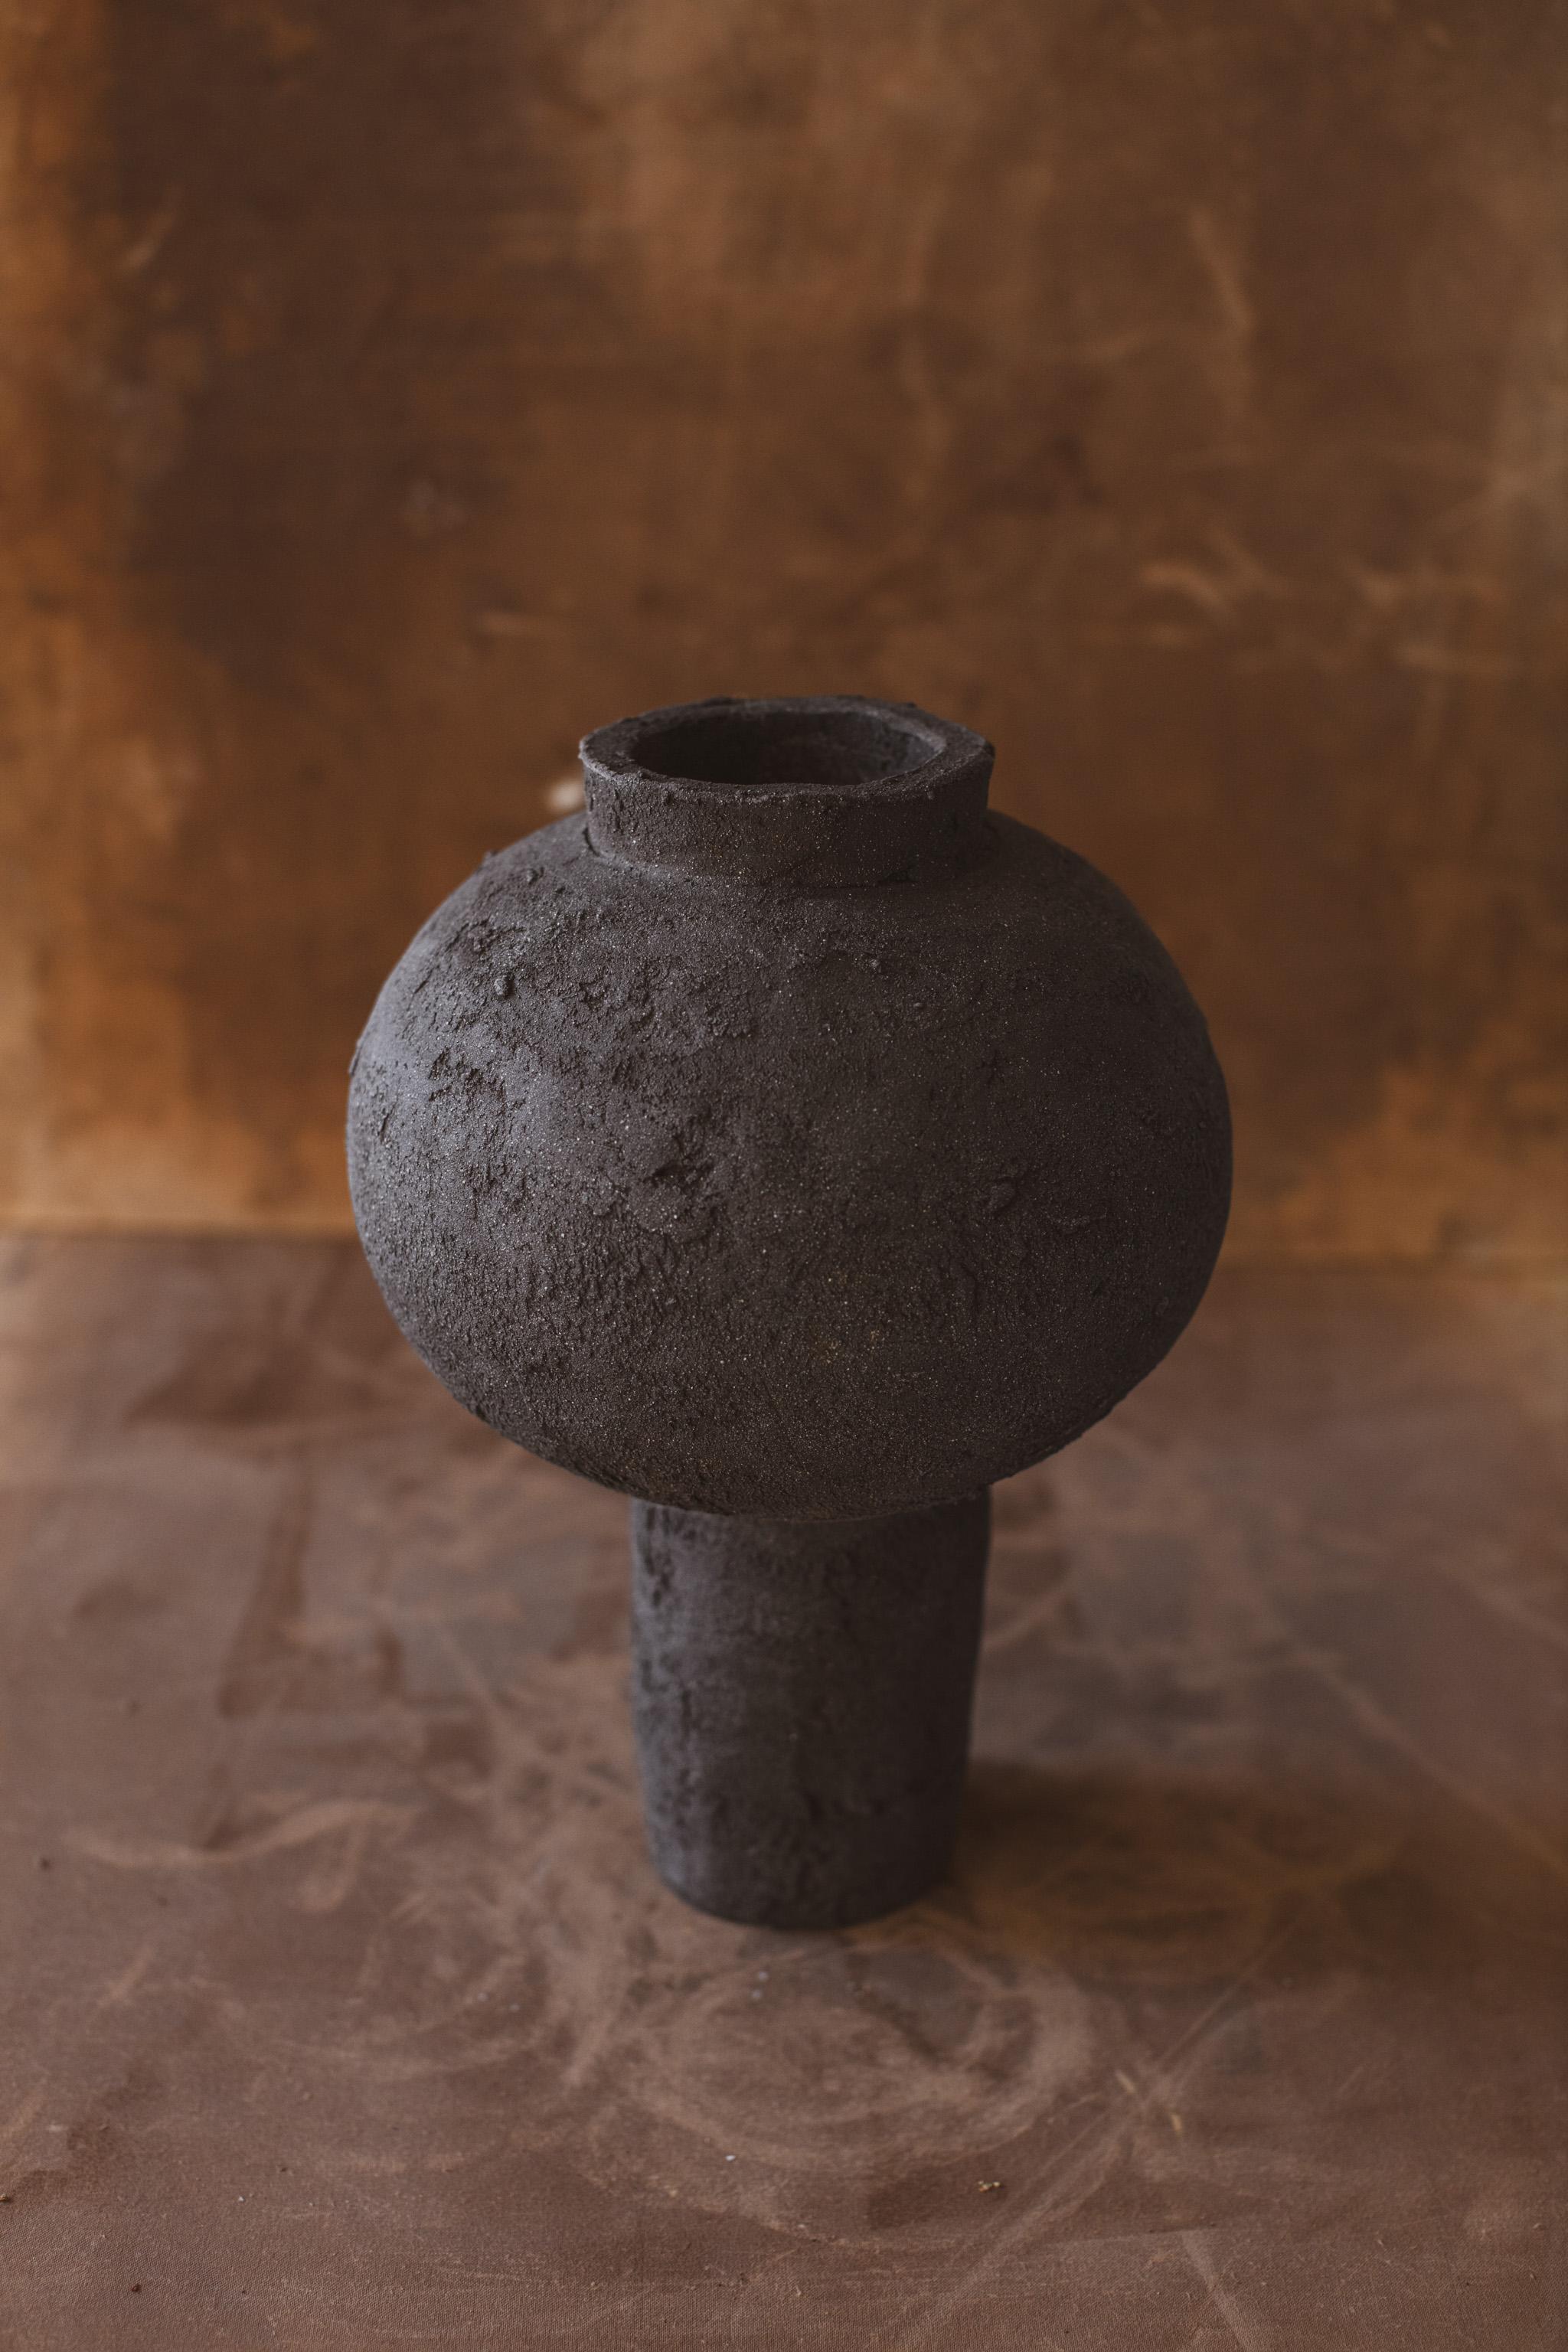 Mugly NYC is a Brooklyn based ceramic studio specializing in richly textured sculptural clay and porcelain that evoke the poetics of the handmade.

This Moon Jar was handmade in 2022 with highly textured black sculpture clay to create a raw look,